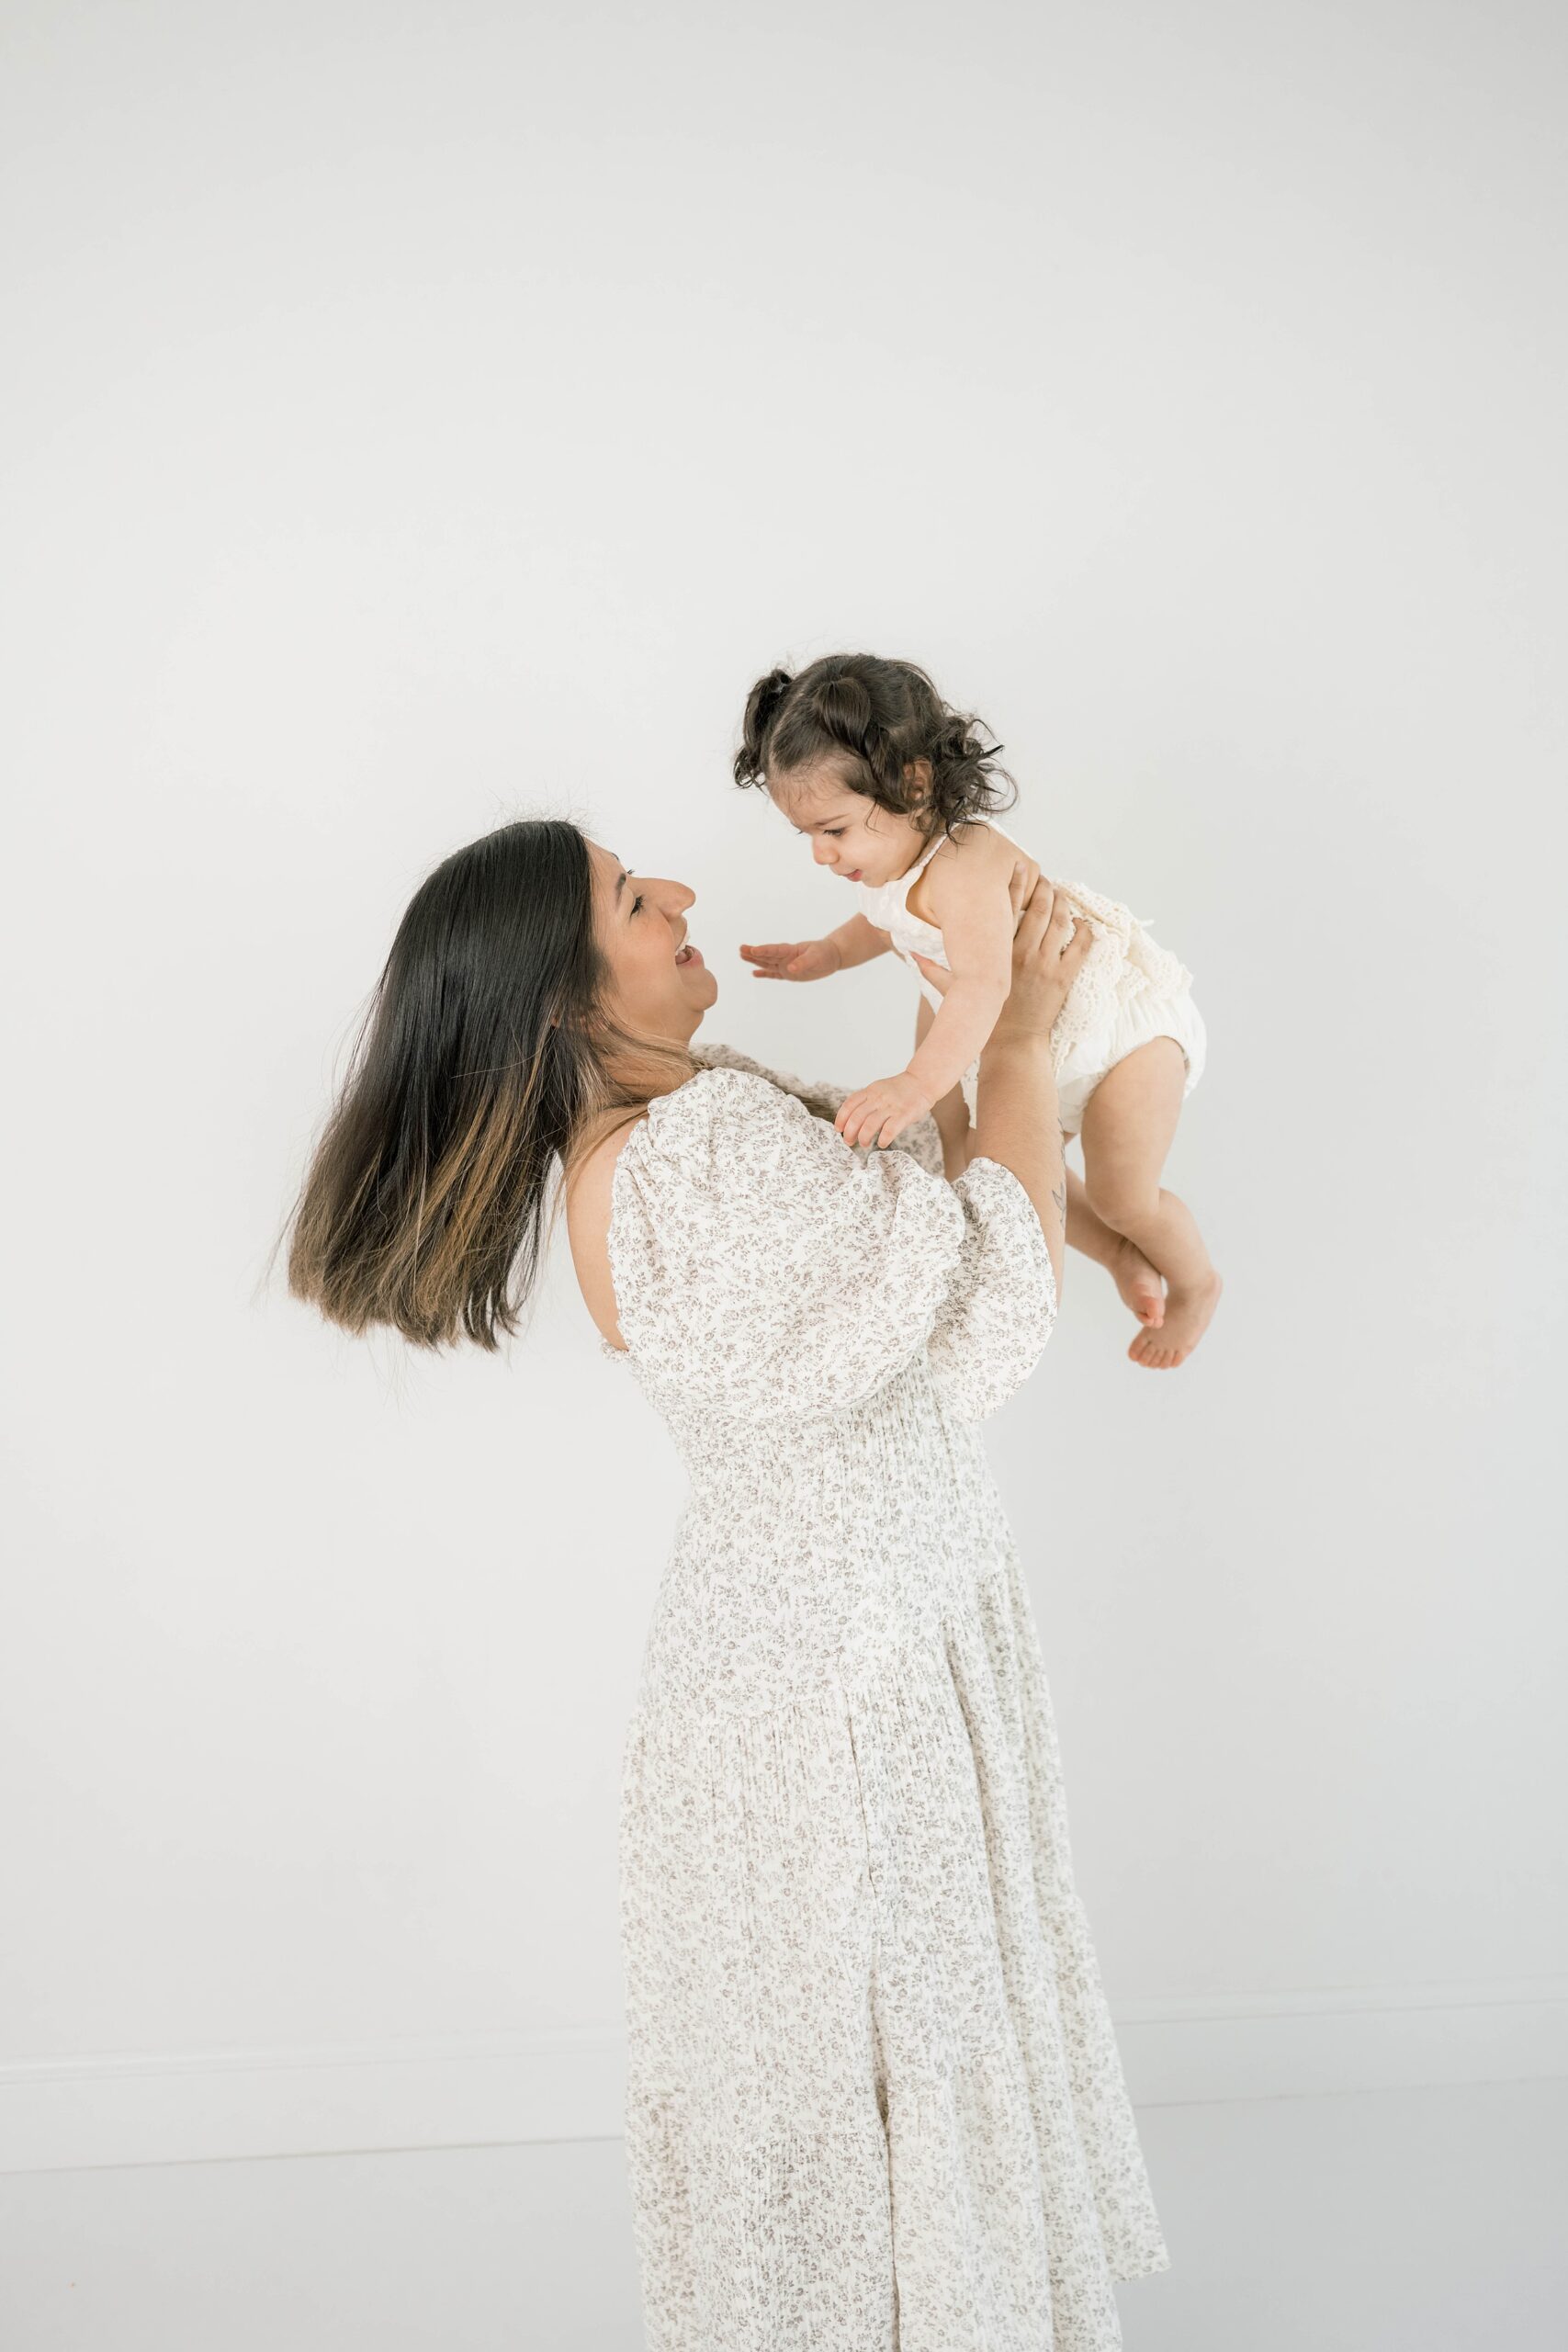 A mother in a white floral print dress lifts and plays with her toddler daughter in a studio